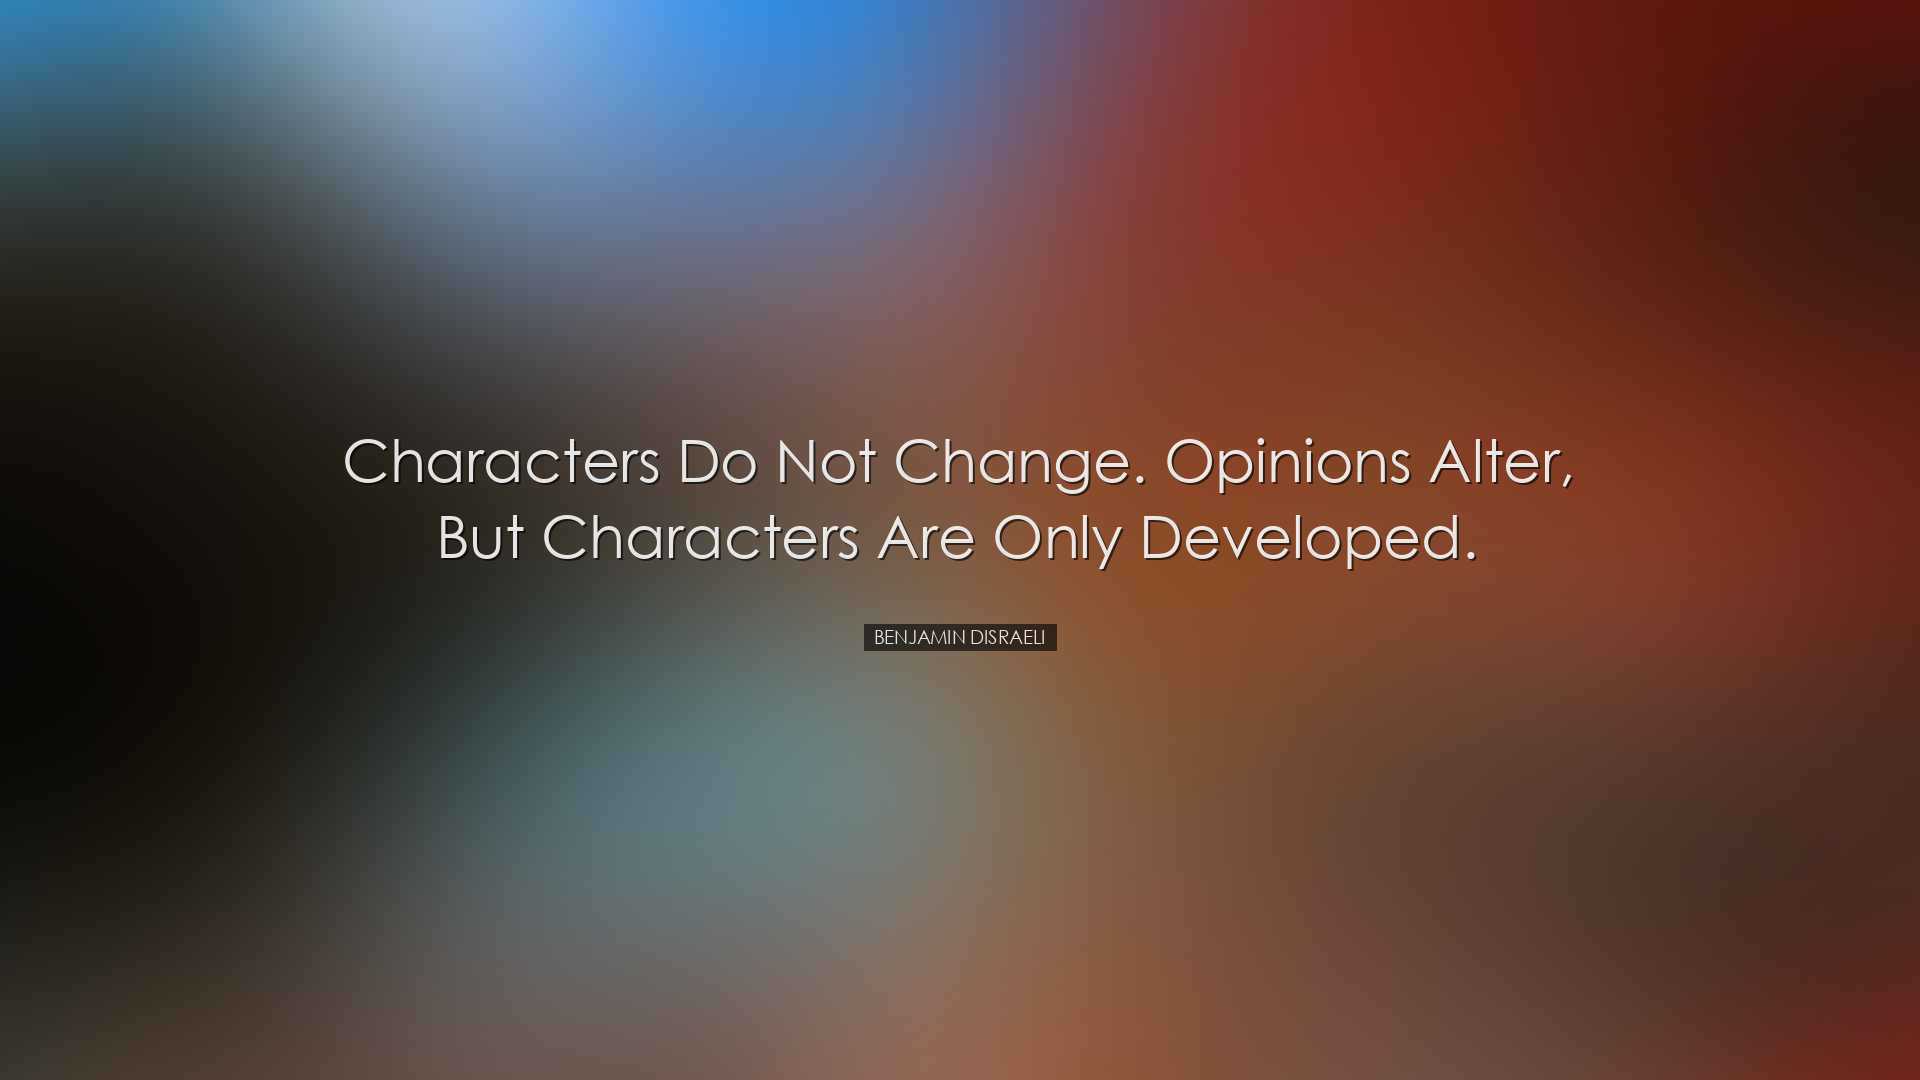 Characters do not change. Opinions alter, but characters are only